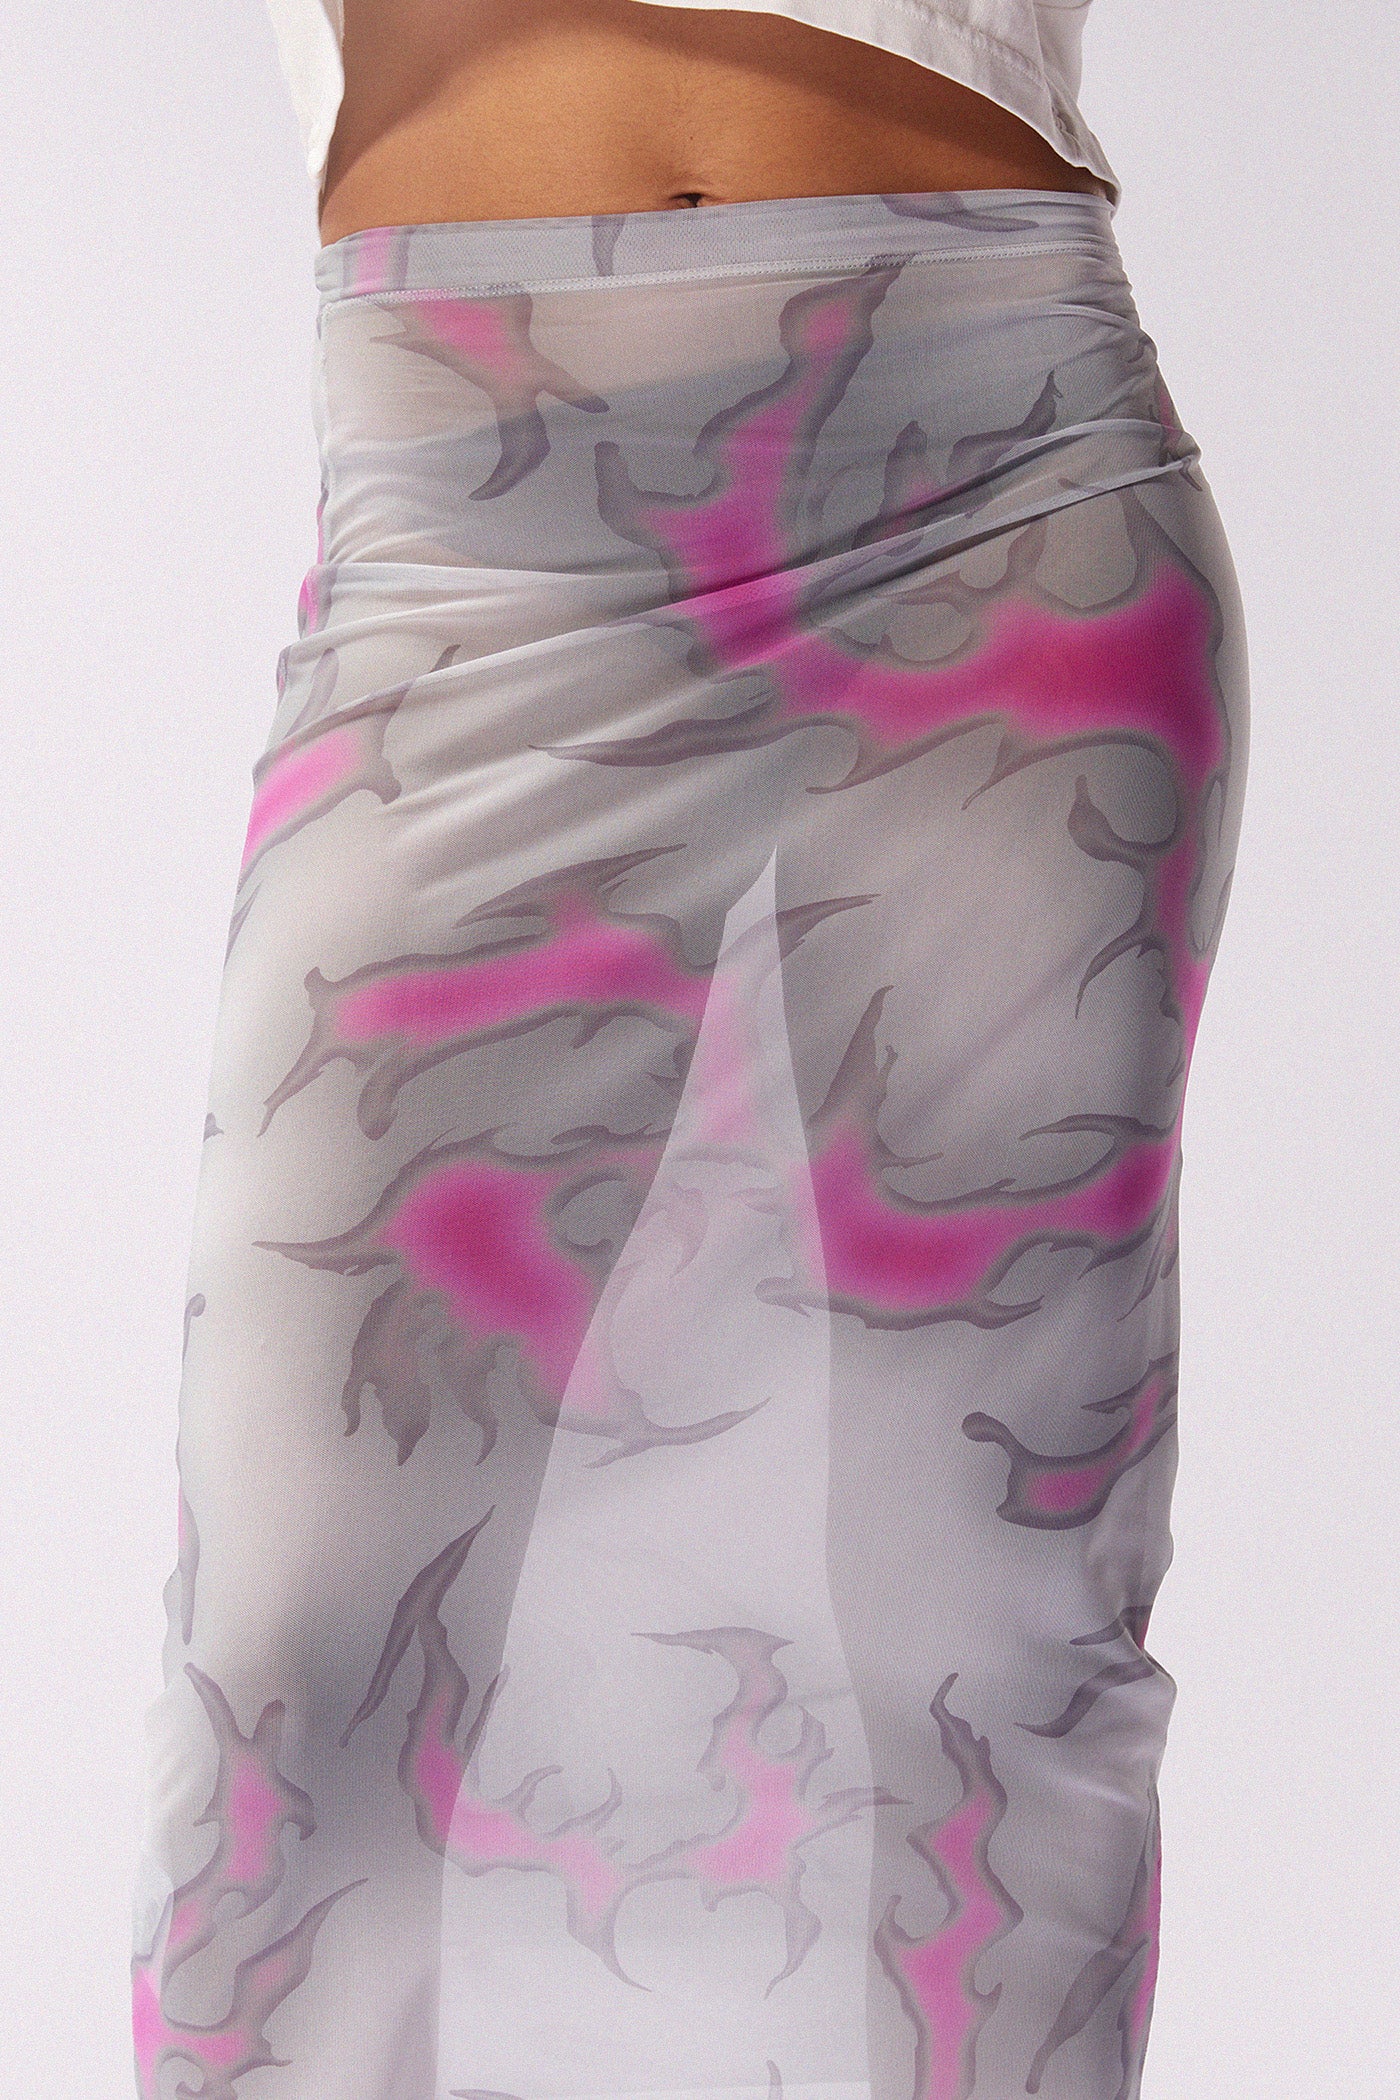 MACCAPANI - THE OVER SKIRT - PEARL GREY AND NEON PINK